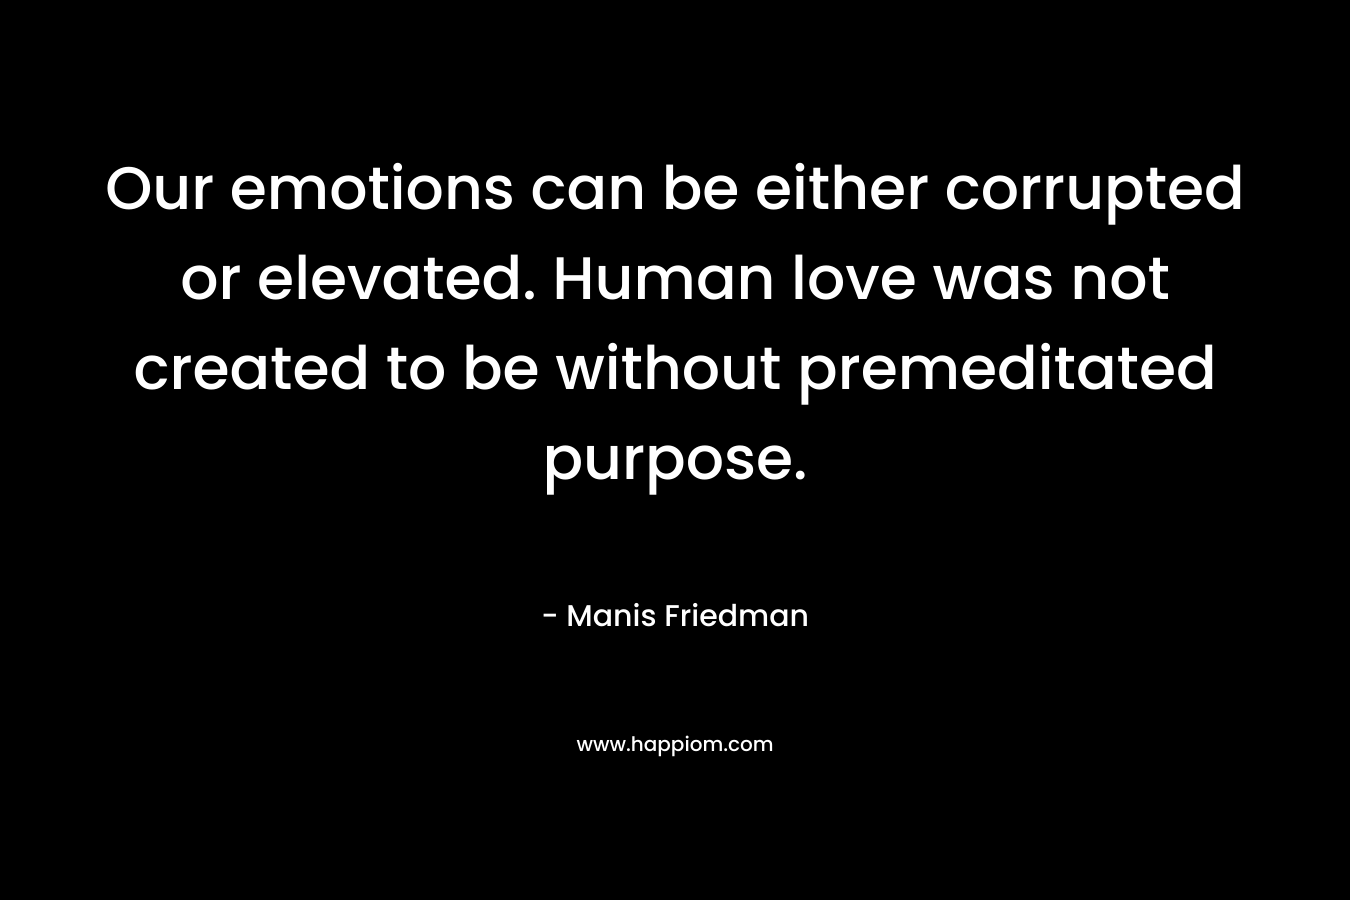 Our emotions can be either corrupted or elevated. Human love was not created to be without premeditated purpose. – Manis Friedman